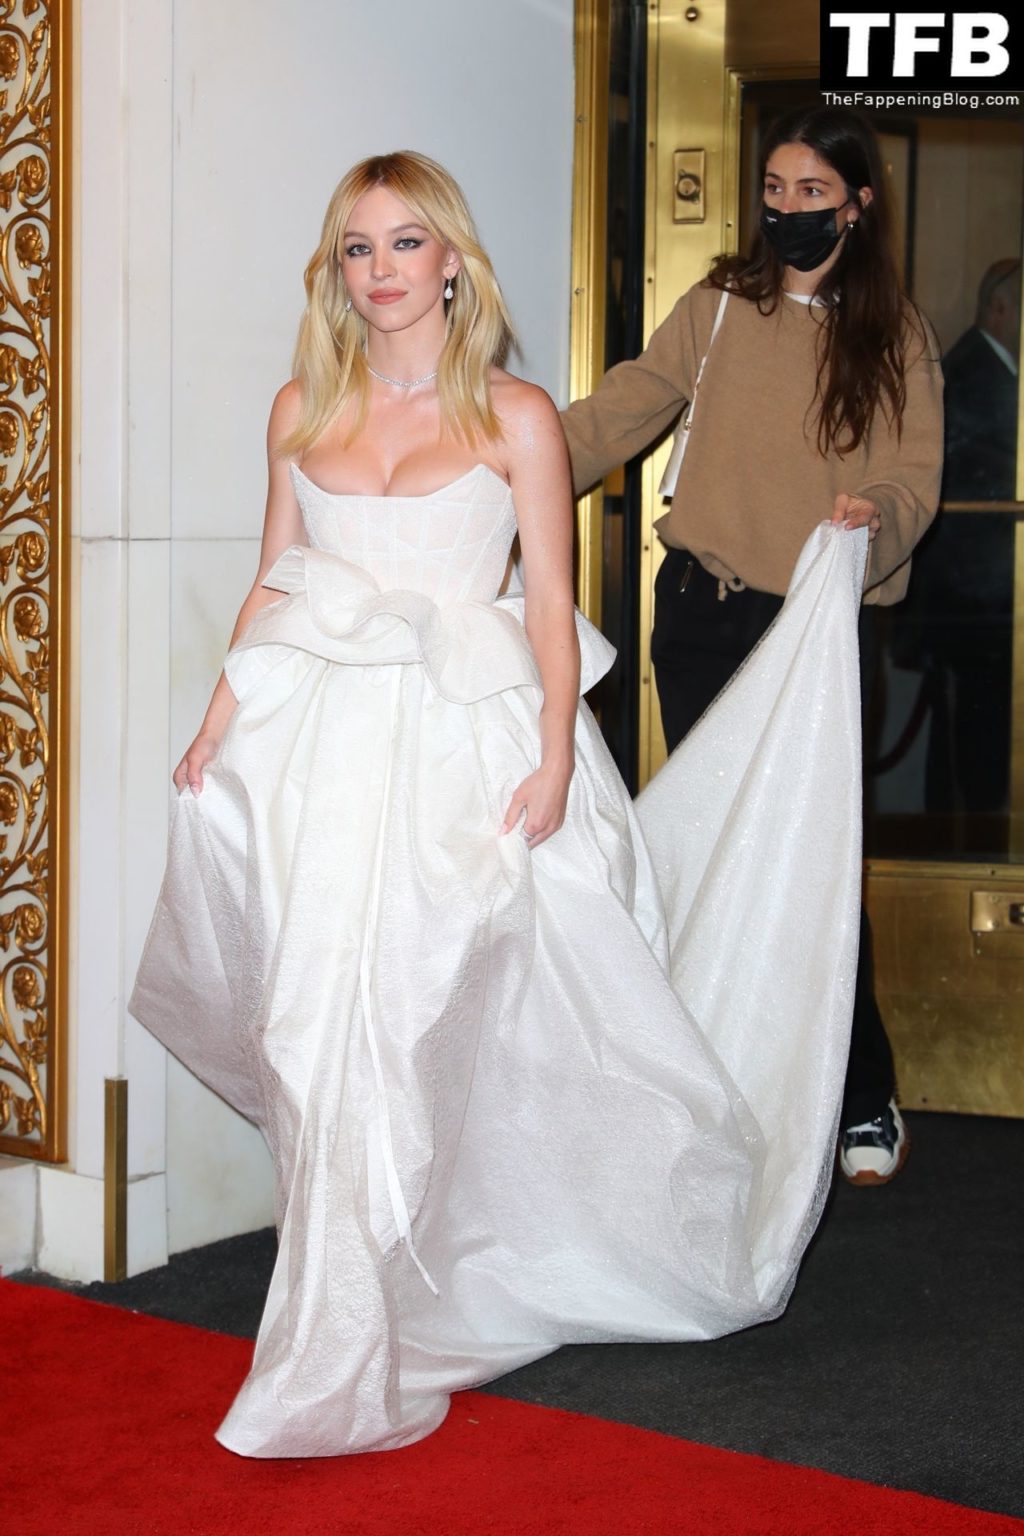 Sydney Sweeney Sexy The Fappening Blog 36 1024x1536 - Sydney Sweeney Looks Hot in White at The 2022 Met Gala in NYC (132 Photos)